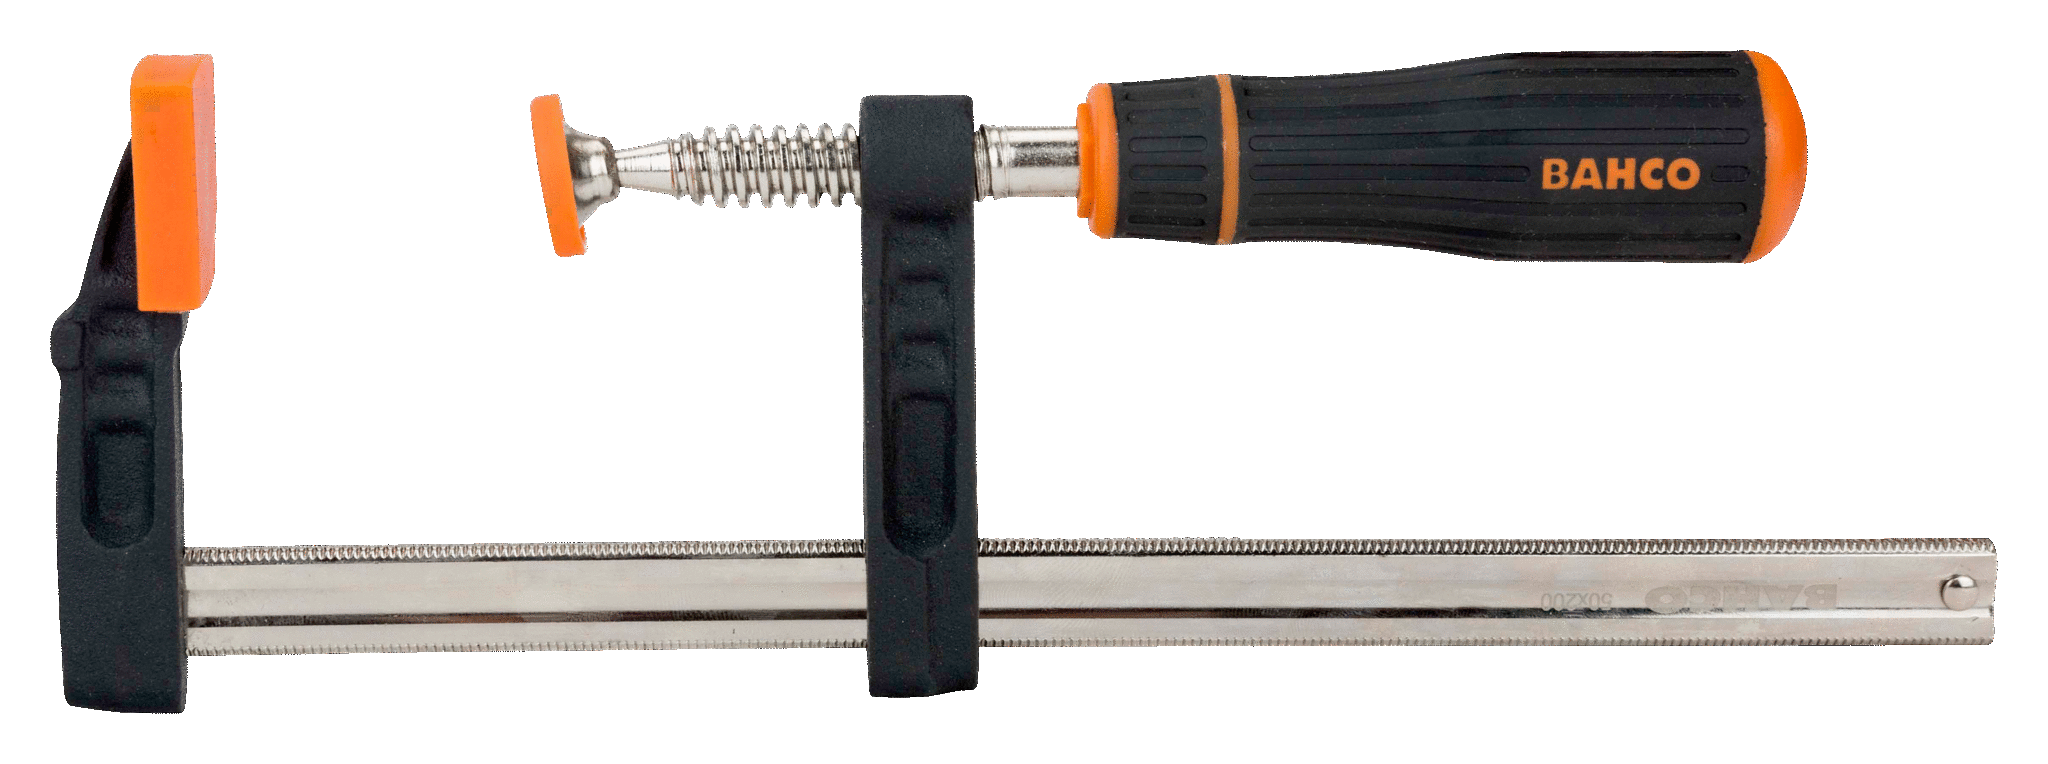 F-Clamps with Rubberised Handle - 420SH-120-500 by Bahco